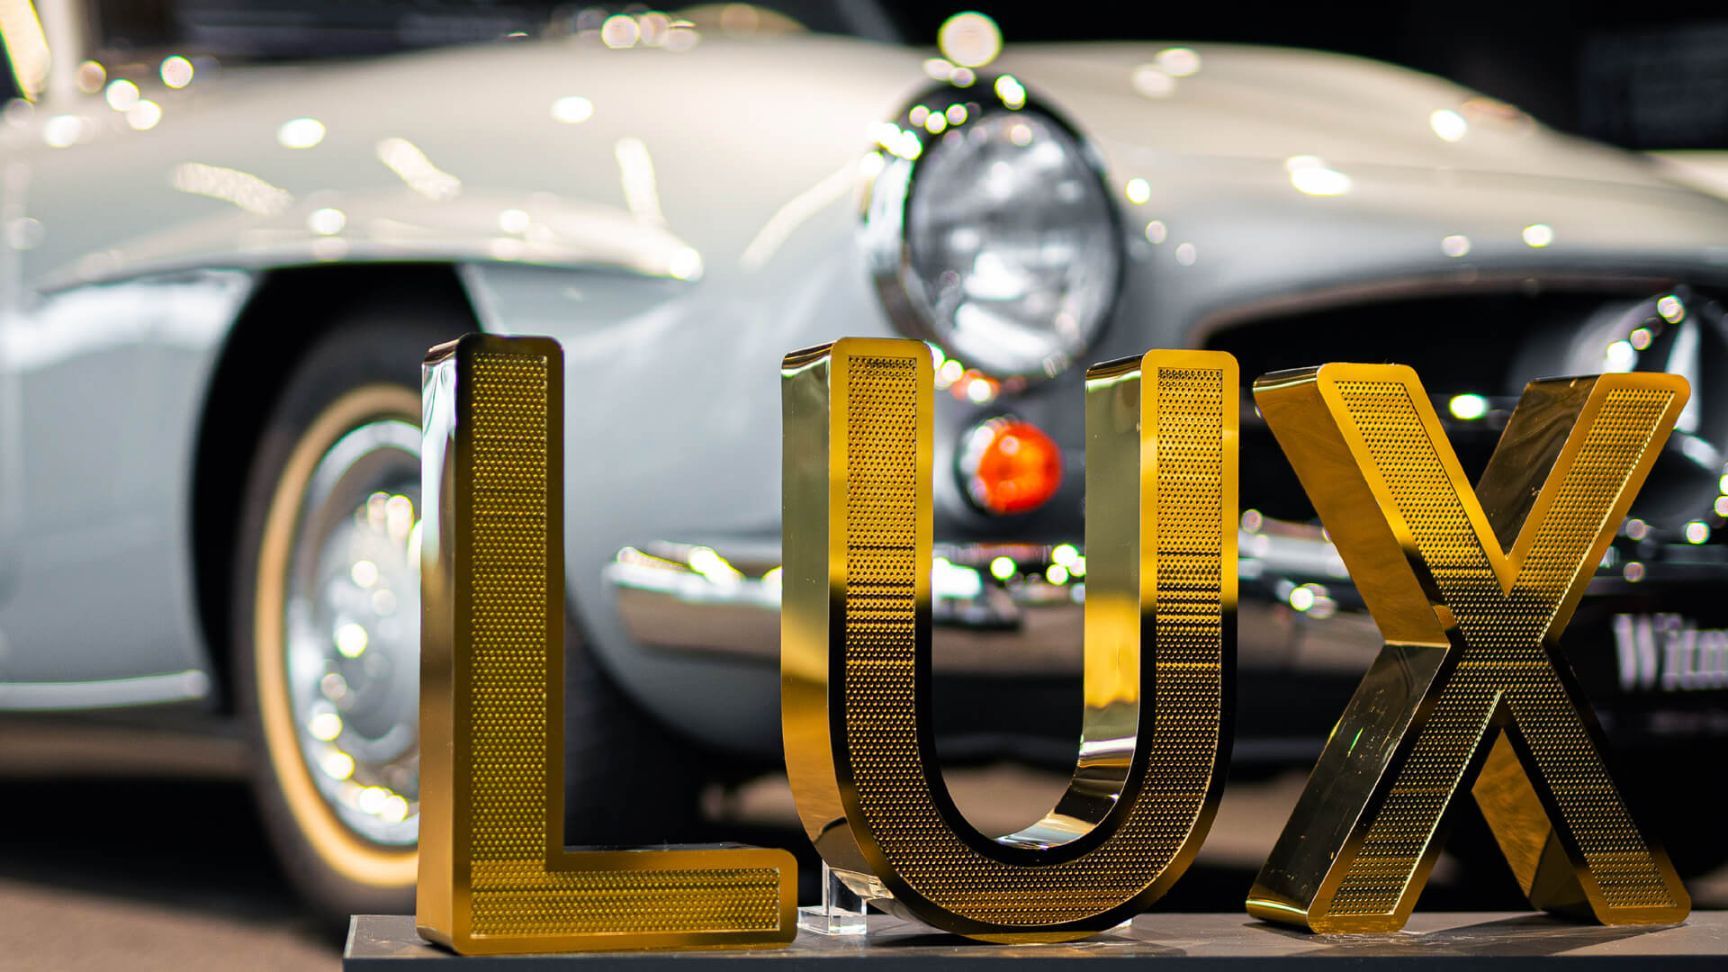 LUX perforated stainless steel letters - LUX letters in gold shiny perforated stainless steel, in Mercedes showroom